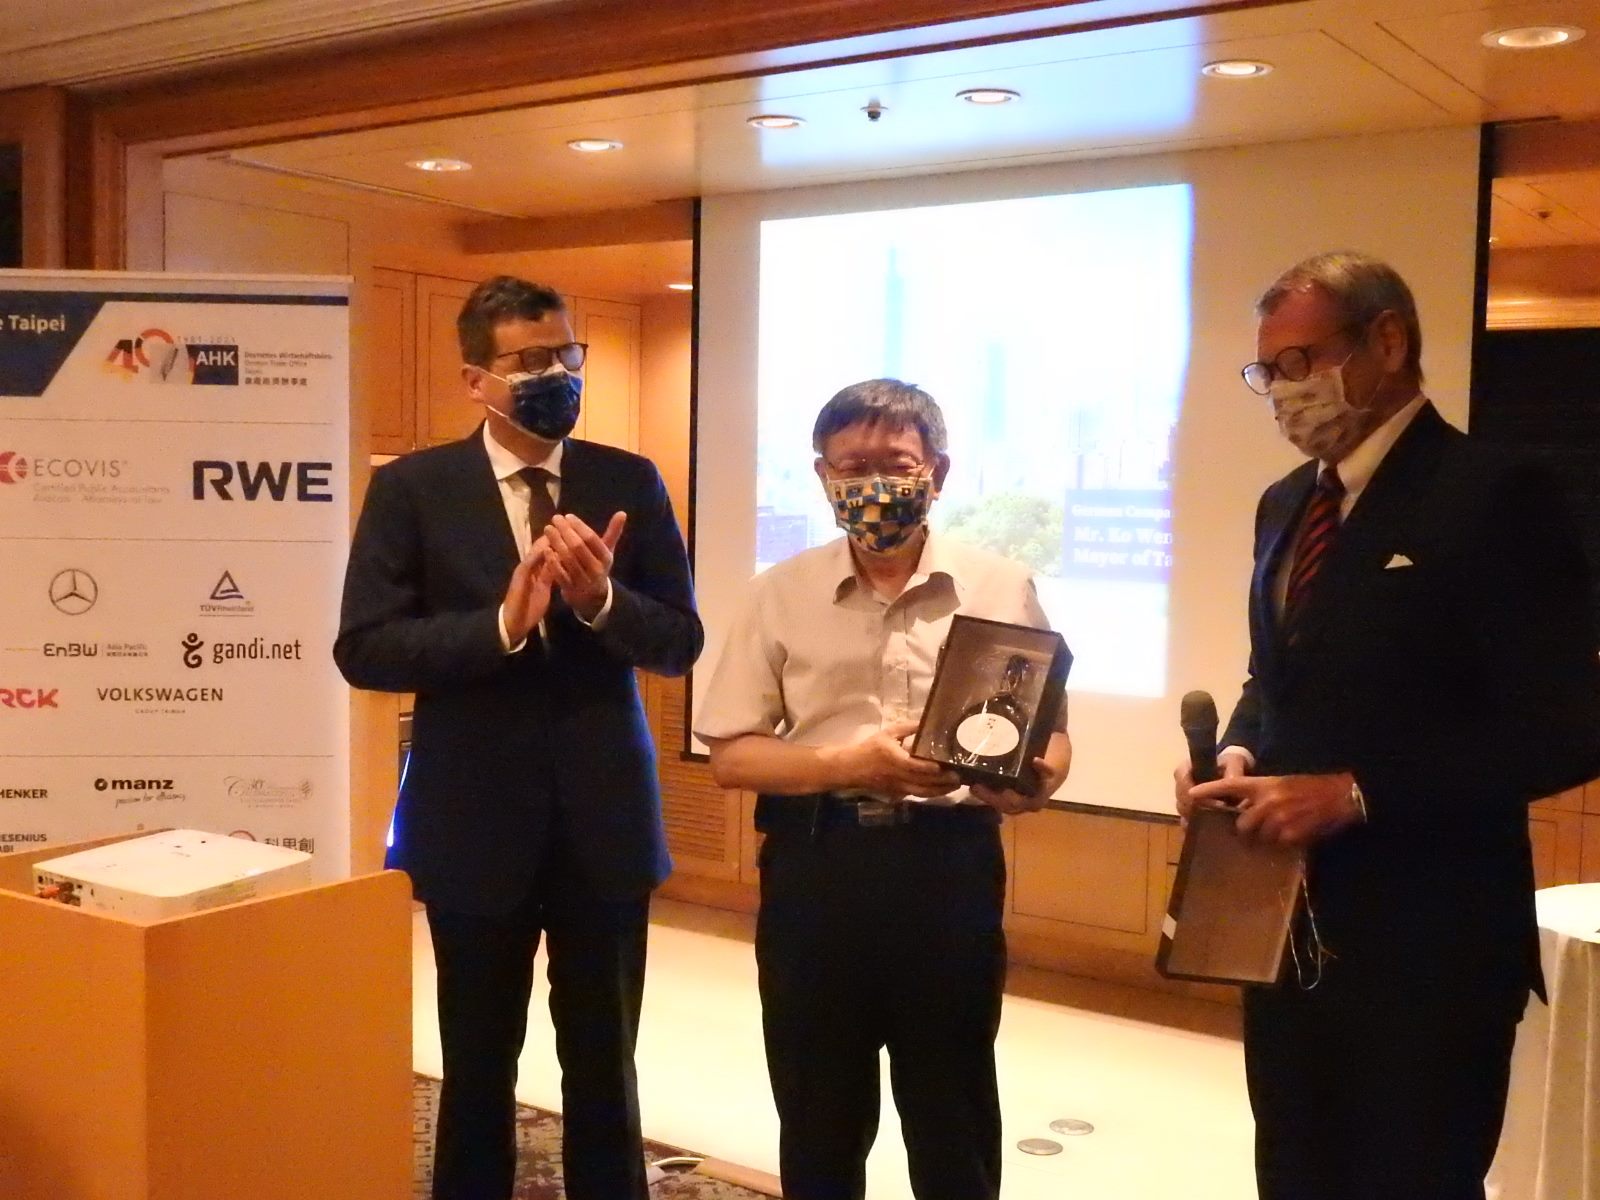 Executive Director Axel Limberg from AHK and Dr. Thomas Prinz from German Institute Taipei exchange gifts with Mayor Ko